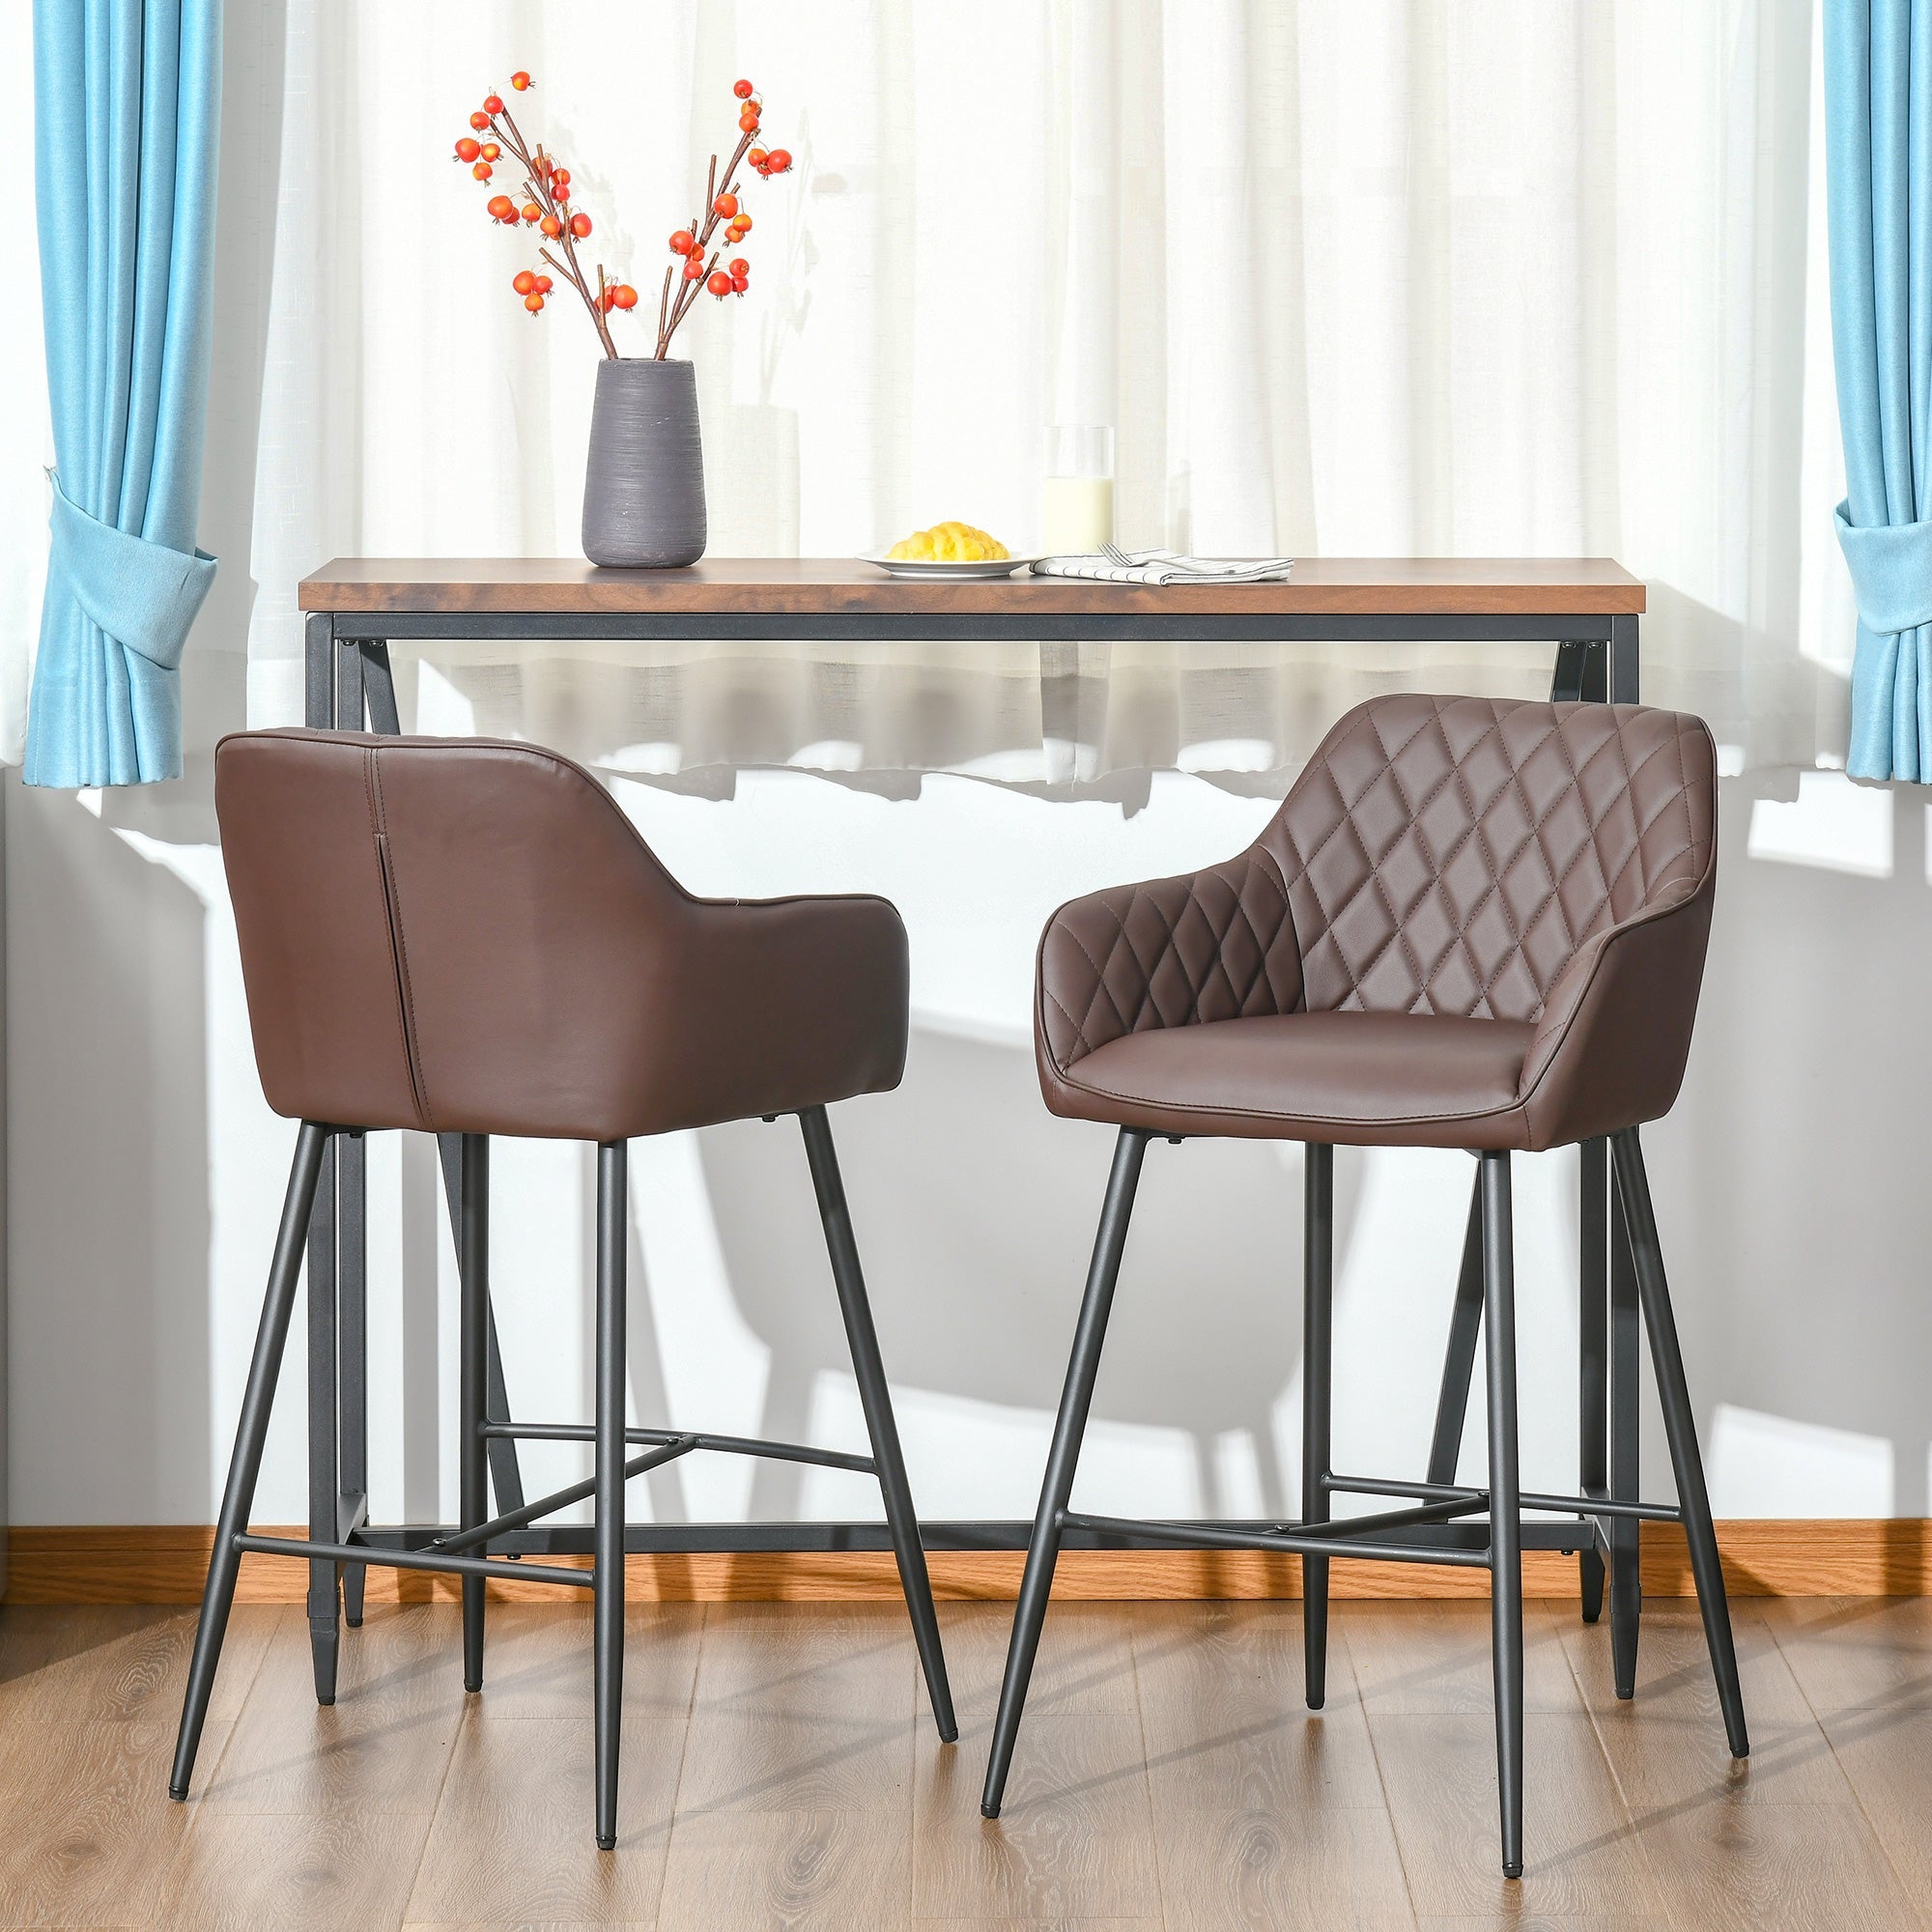 Set of 2 Bar stools With Backs Retro PU Leather Bar Chairs w/ Footrest Metal Frame Comfort Support Stylish Dining Seating Home Brown-1